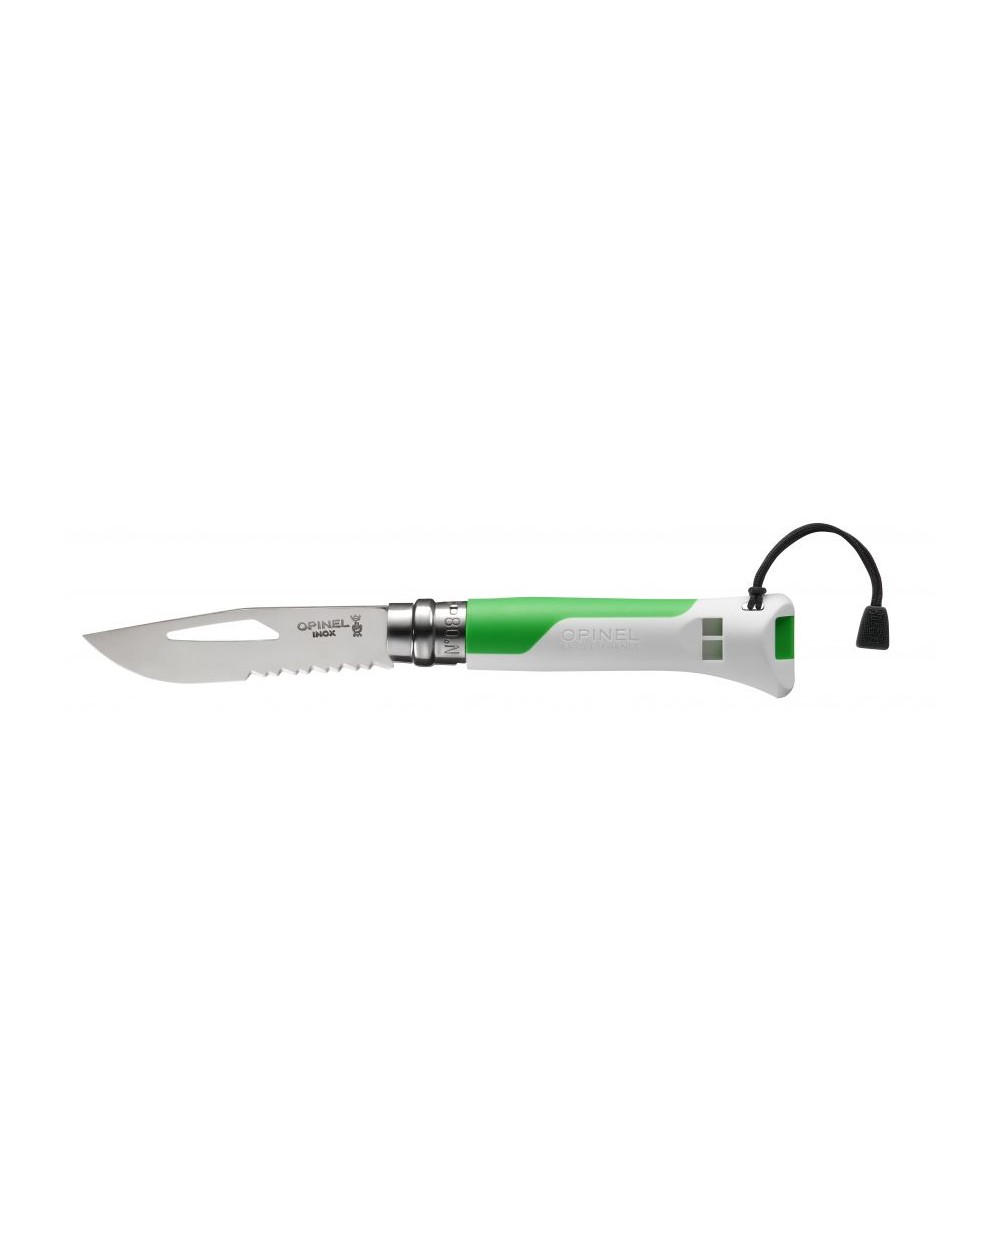 Couteau outdoor n°8 opinel manche vert fluo